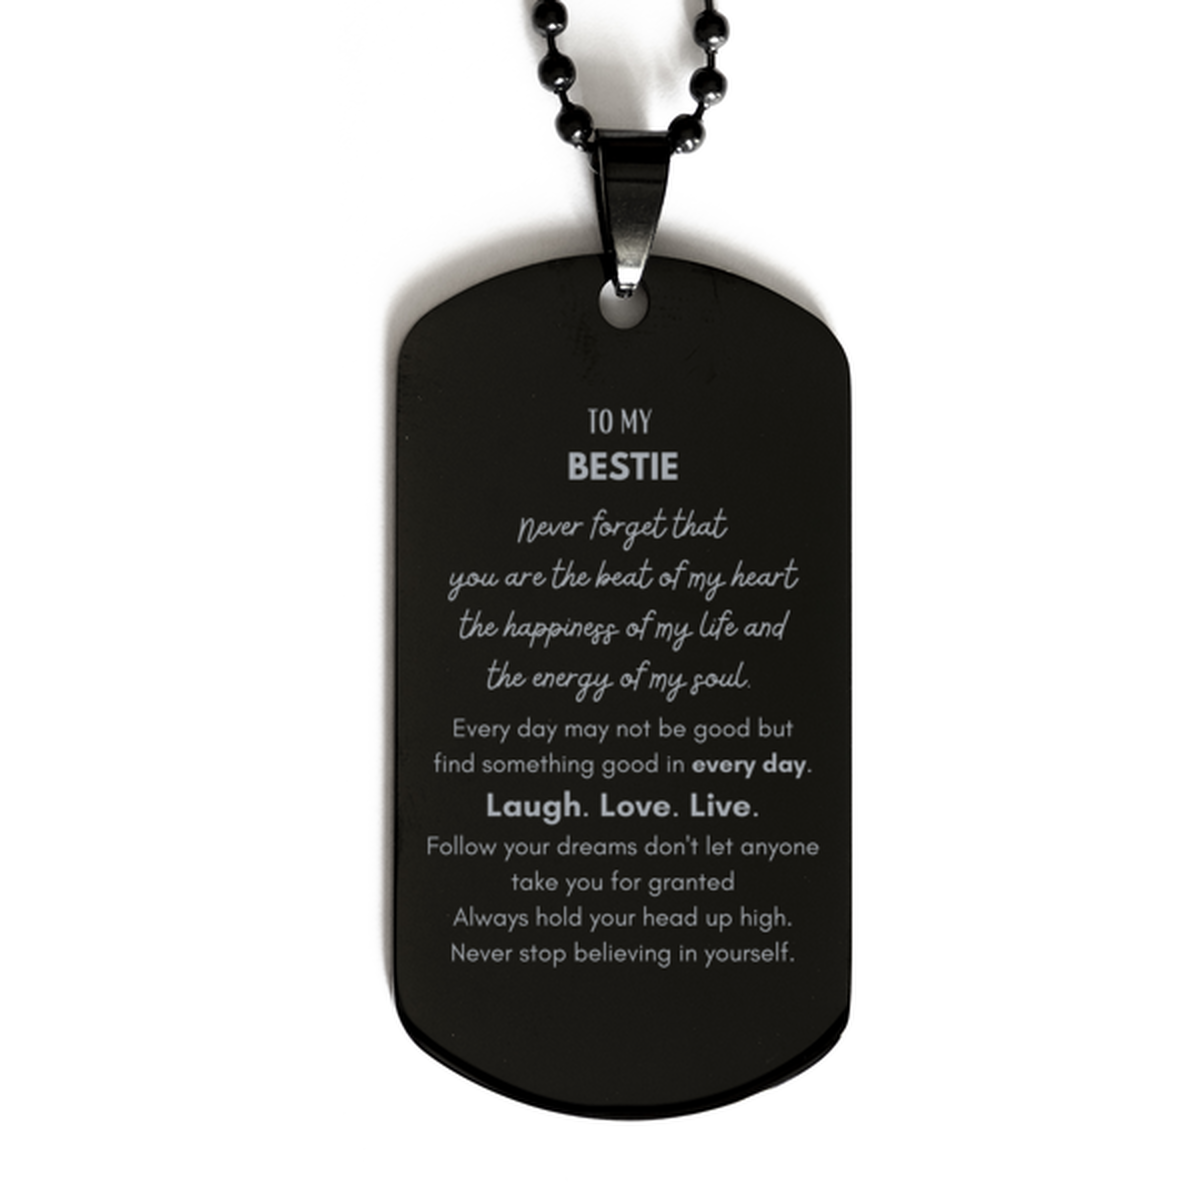 To My Bestie Dogtag Gifts, Christmas Bestie Black Dog Tag Present, Birthday Unique Motivational For Bestie, To My Bestie Never forget that you are the beat of my heart the happiness of my life and the energy of my soul